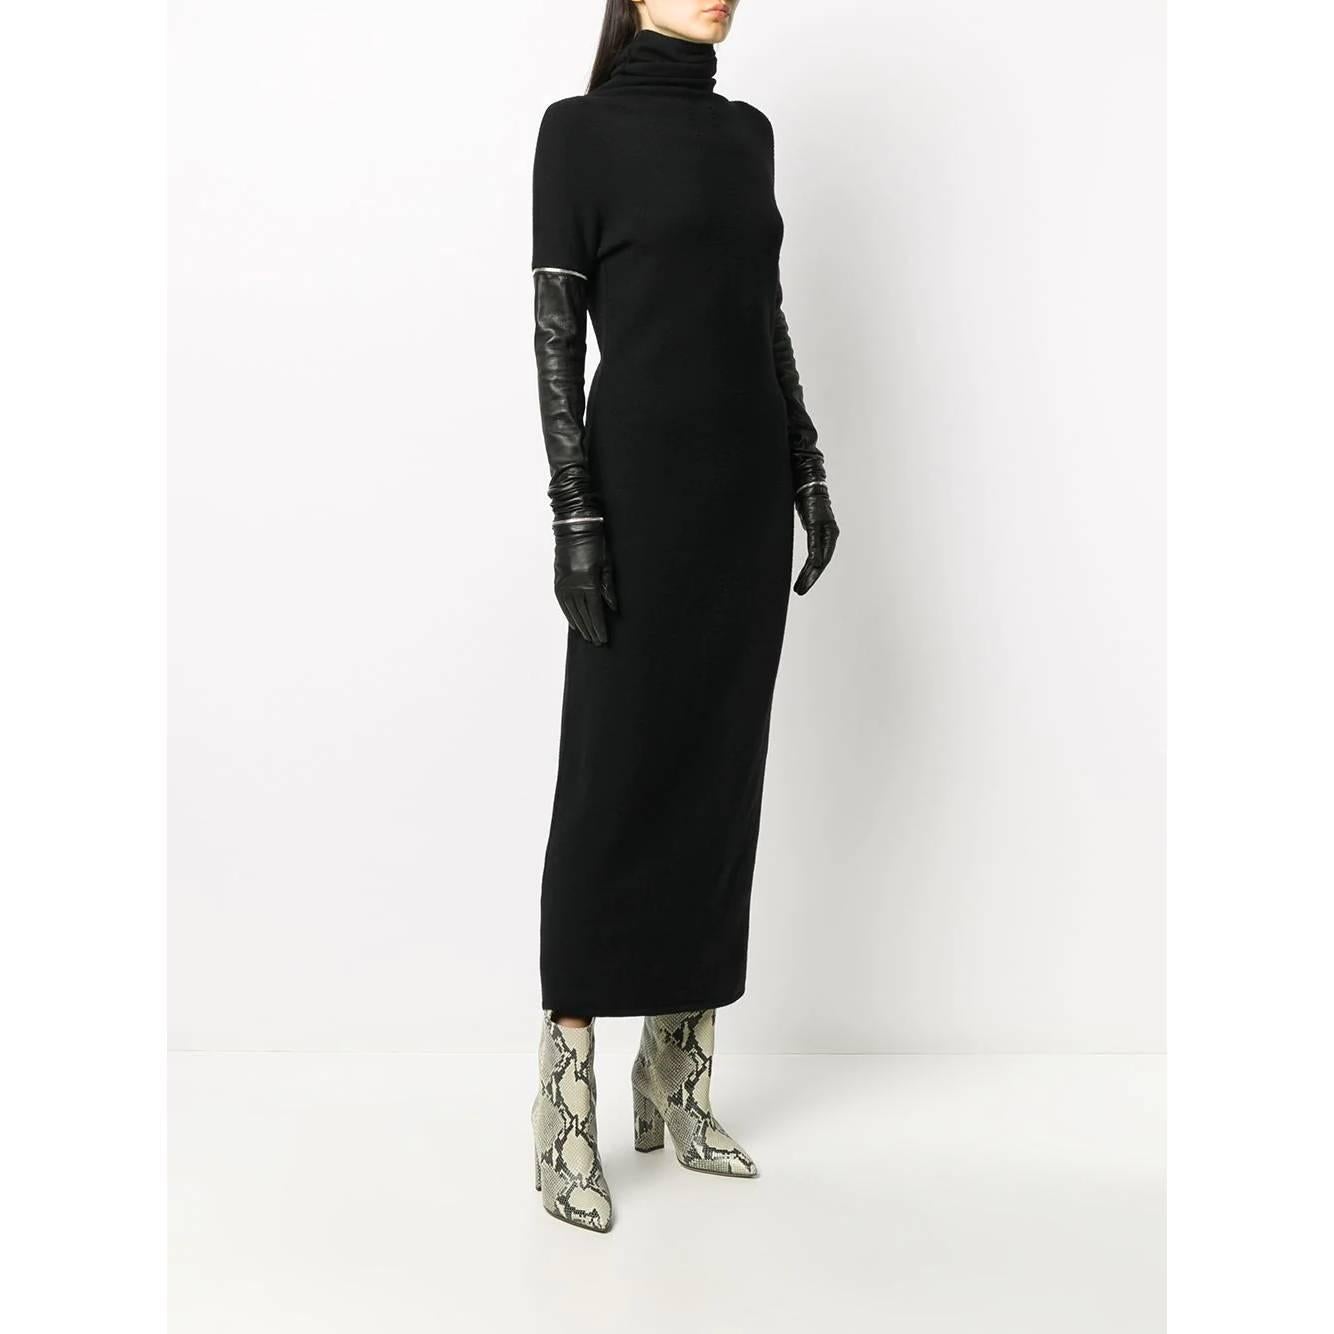 Gianfranco Ferré black wool blend long dress. High collar and zip on the back, removable leather sleeves and gloves.

Years: 90s 

Made in Italy 

Size: 42 IT

Flat measurements 

Height: 130 cm 
Bust: 40 cm
Shoulders: 41 cm
shoulders: 66 cm